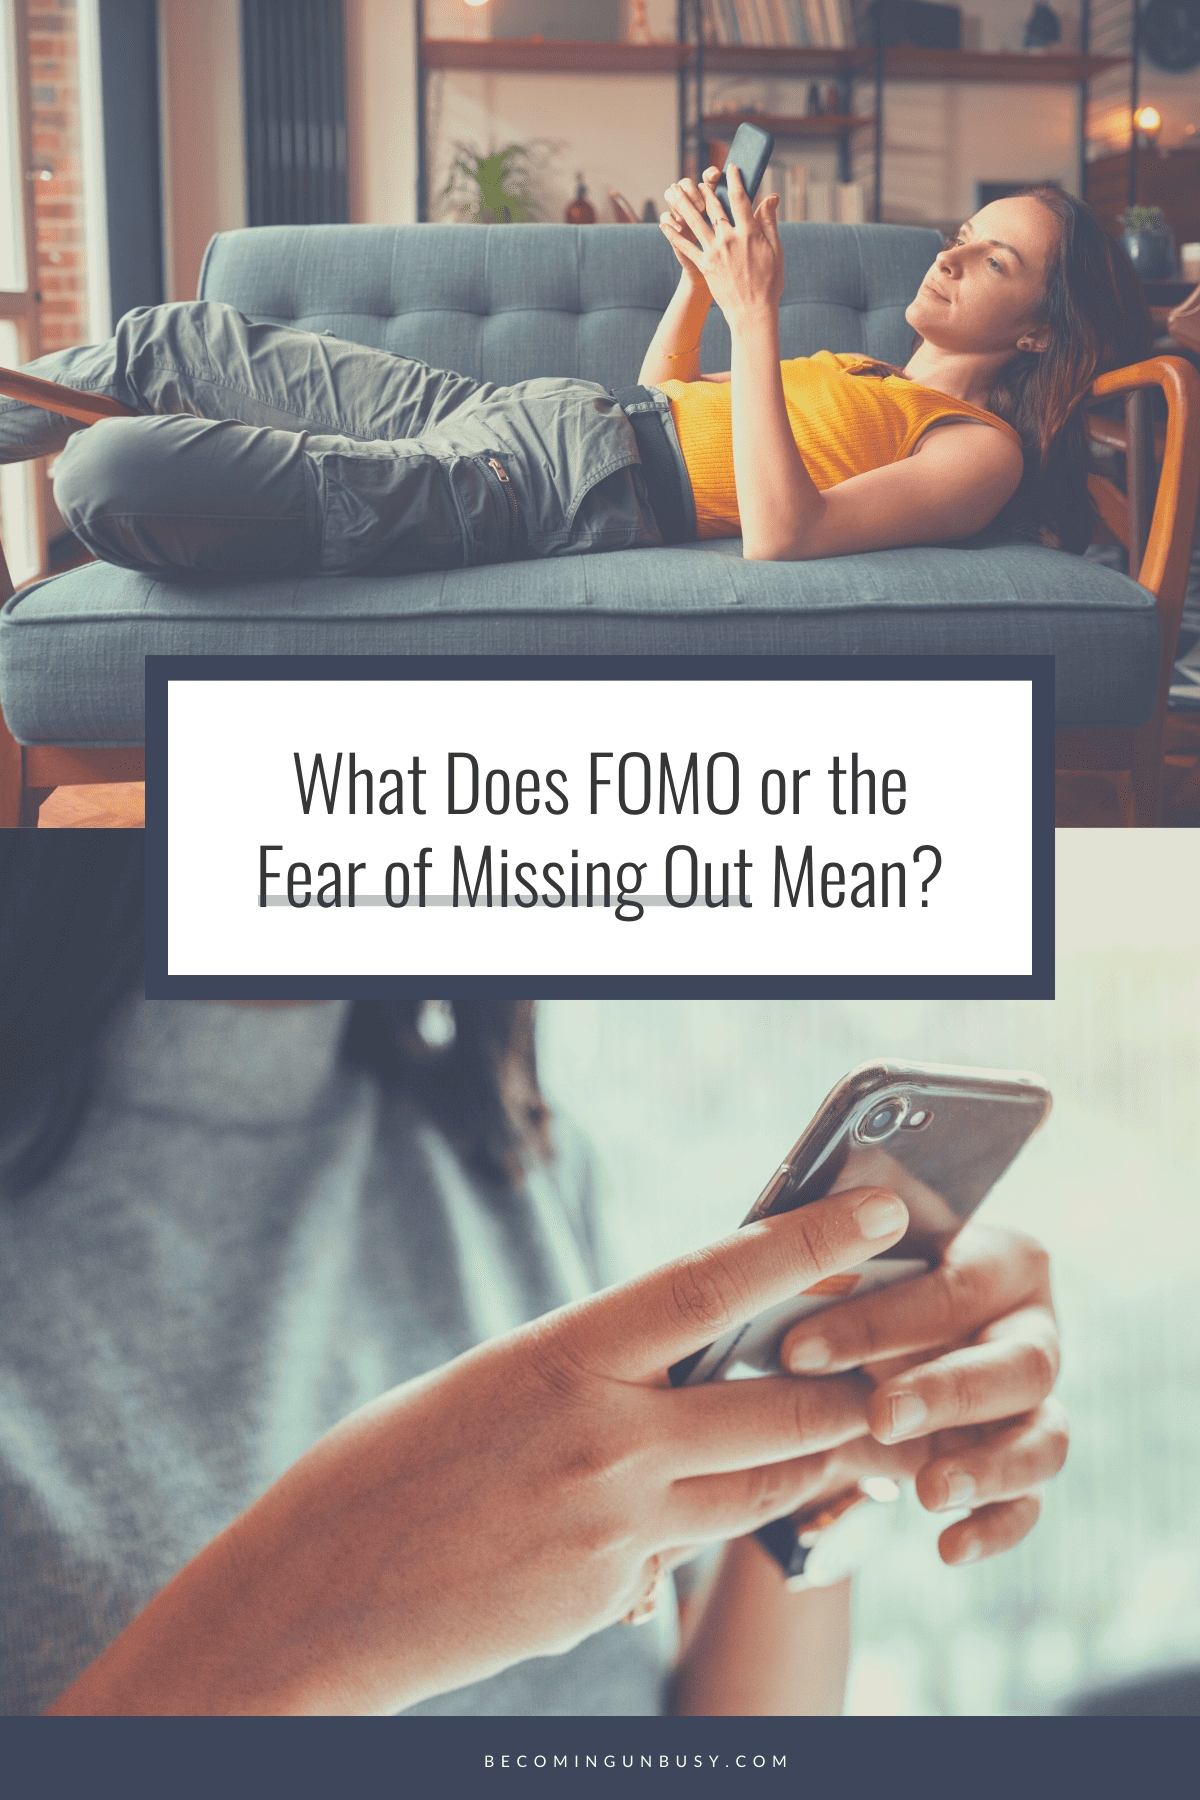 A collage for Pinterest including the blog title, "What does FOMO mean?" as well as photos of (1) A woman lying on a couch struggling with the FOMO as she scrolls on her phone and (2) a close-up image of a woman's hands using a phone.